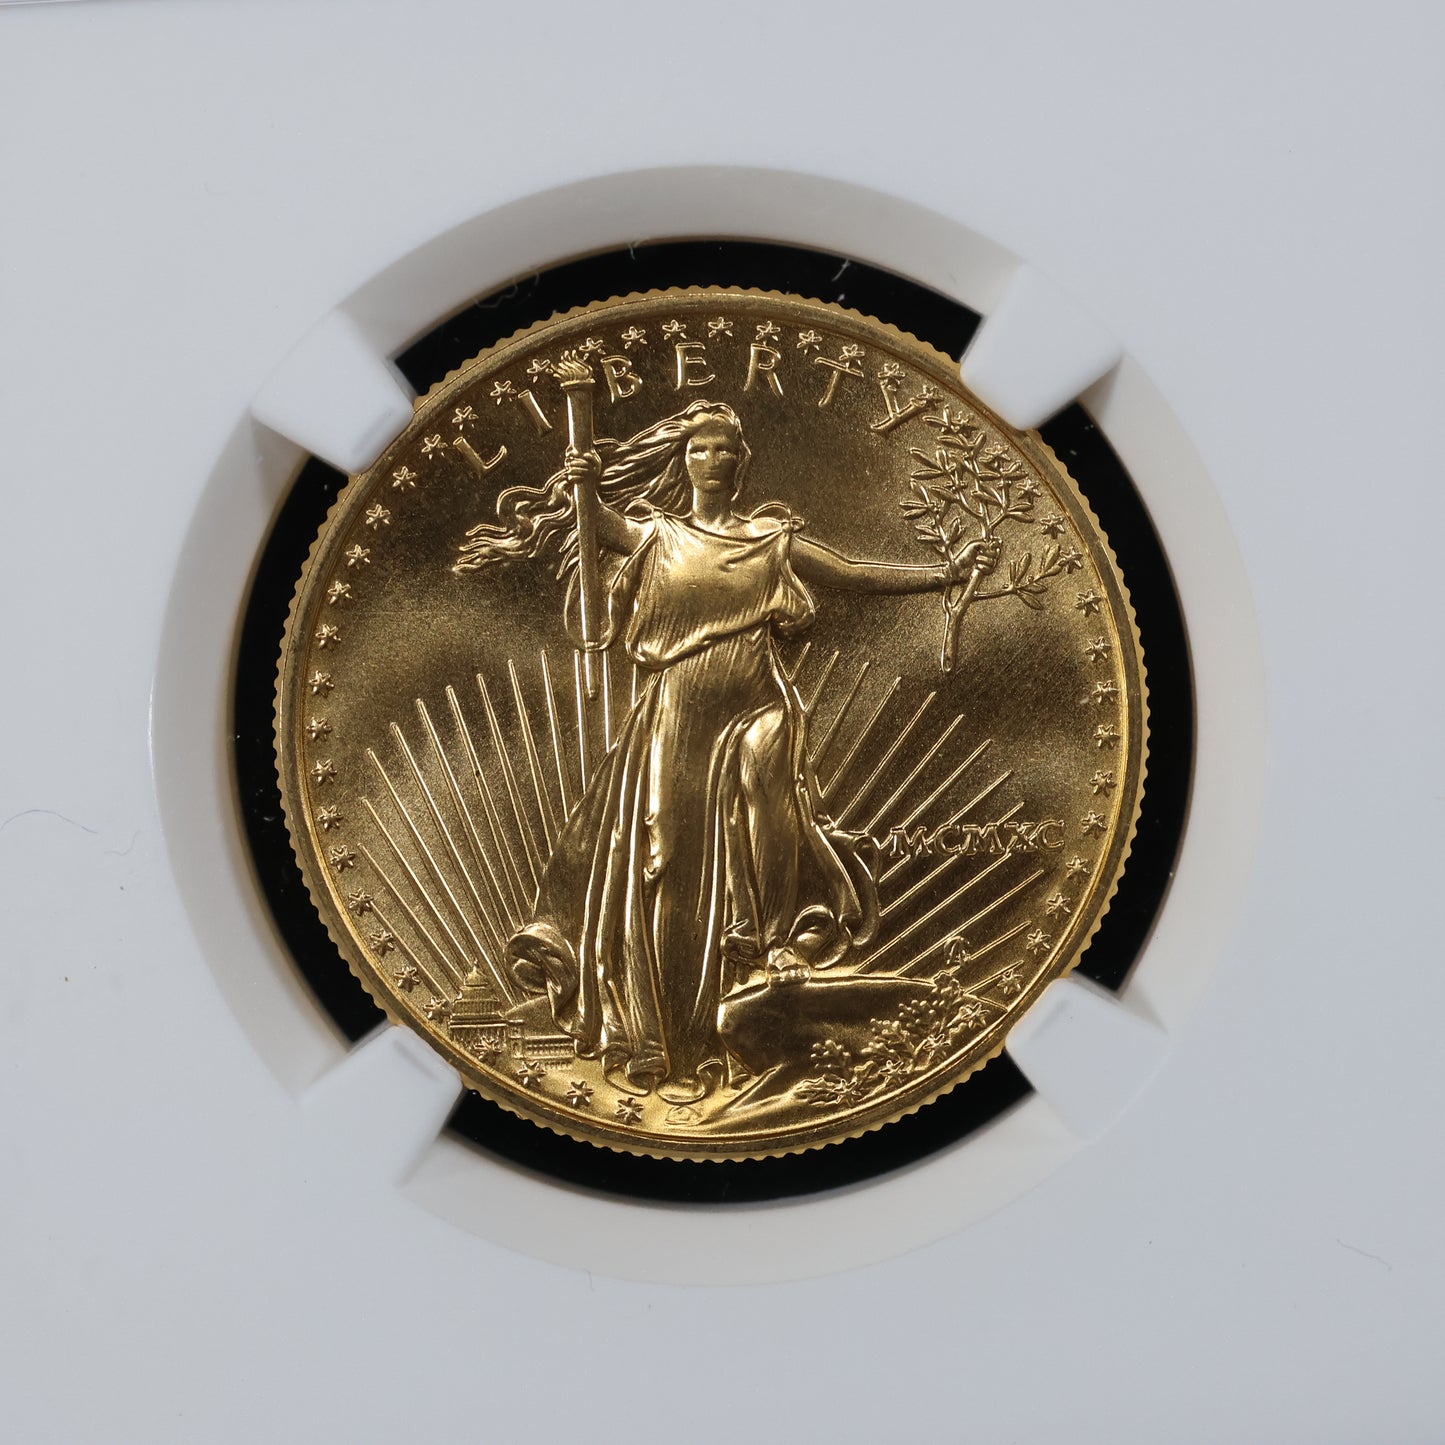 1990 1/2 oz Gold American Eagle 25$ Bullion Gold Coin - NGC MS 69